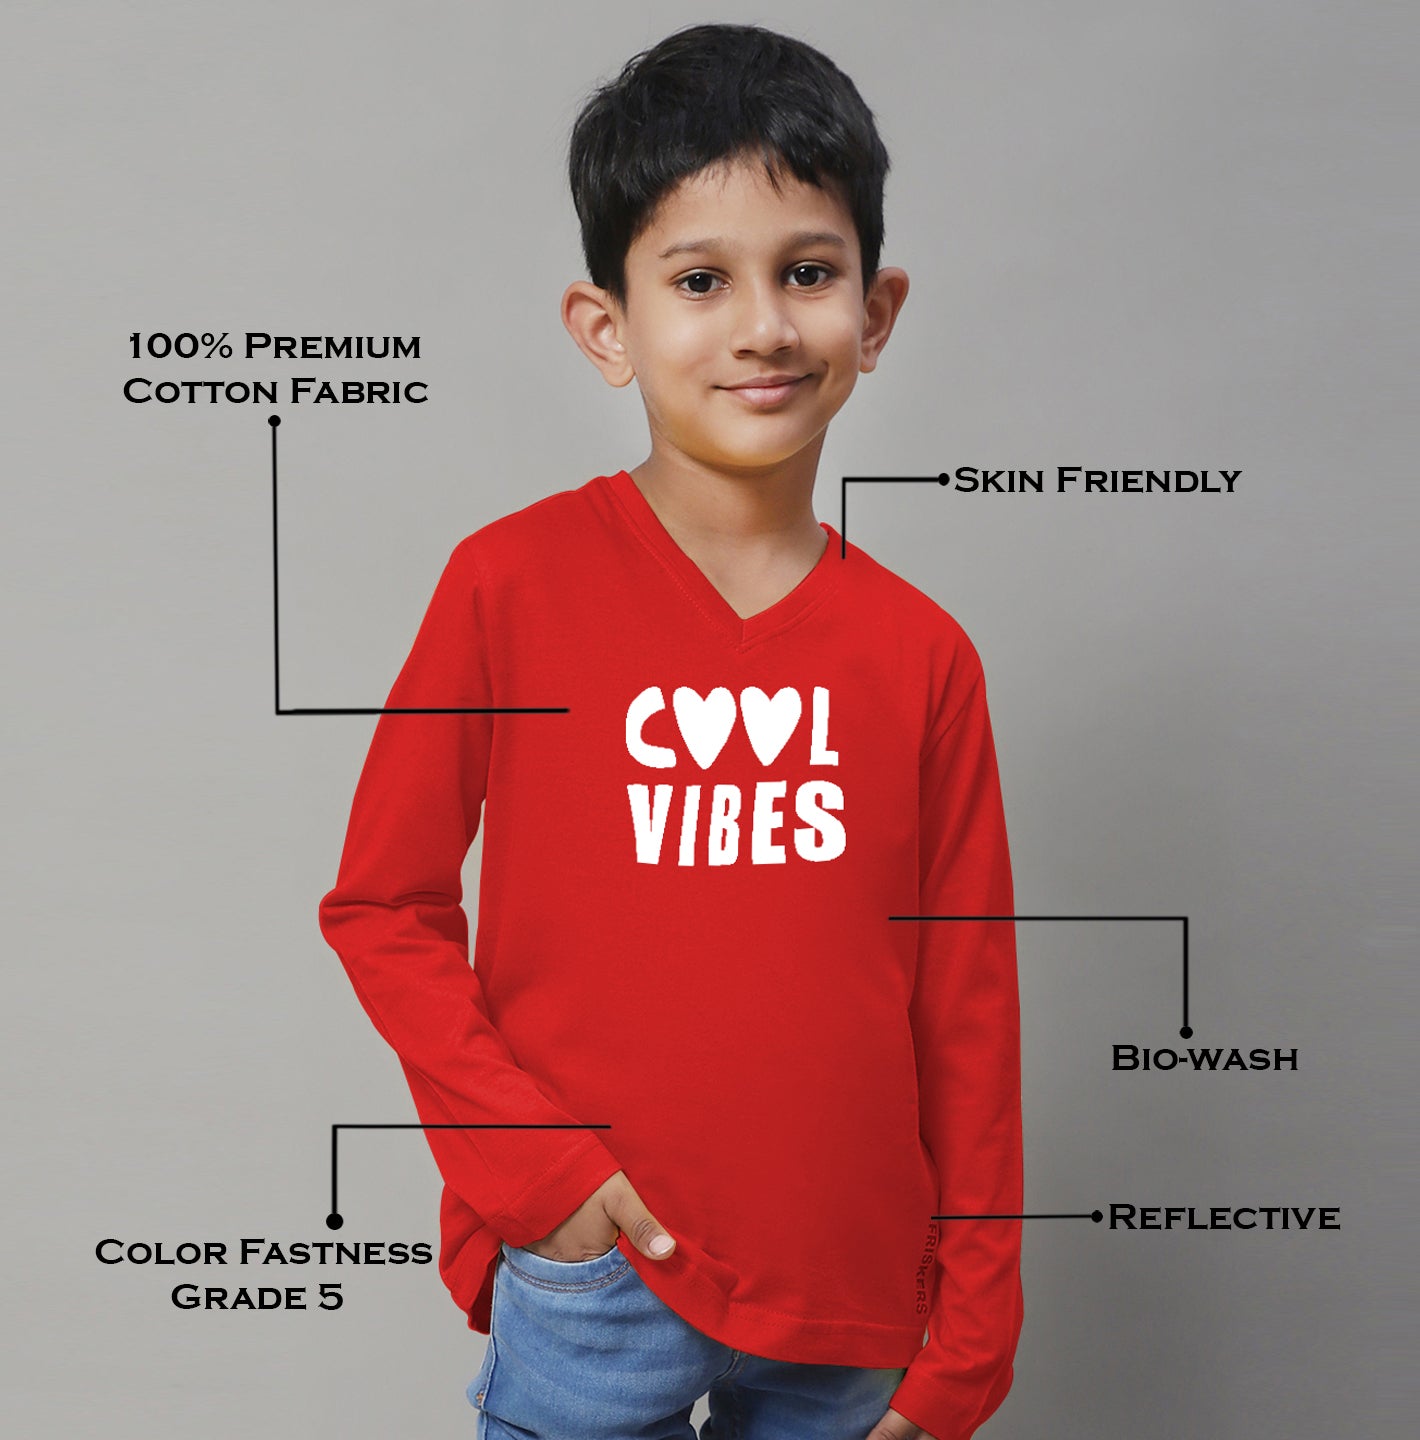 Boys Cool Vibes Full Sleeves Printed T-Shirt - Friskers